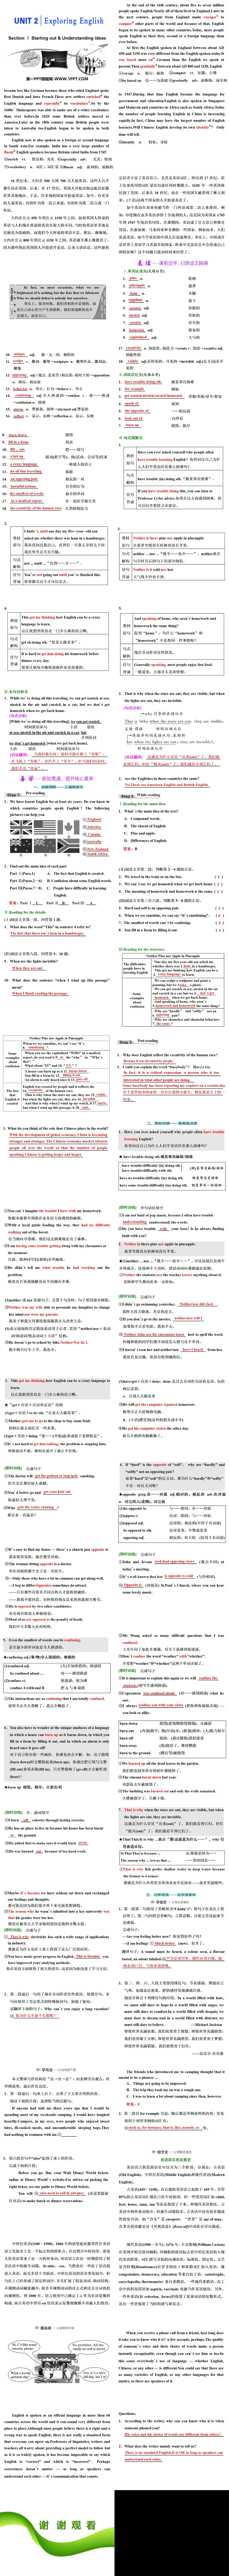 《Exploring English》Section ⅠPPT课件
（2）